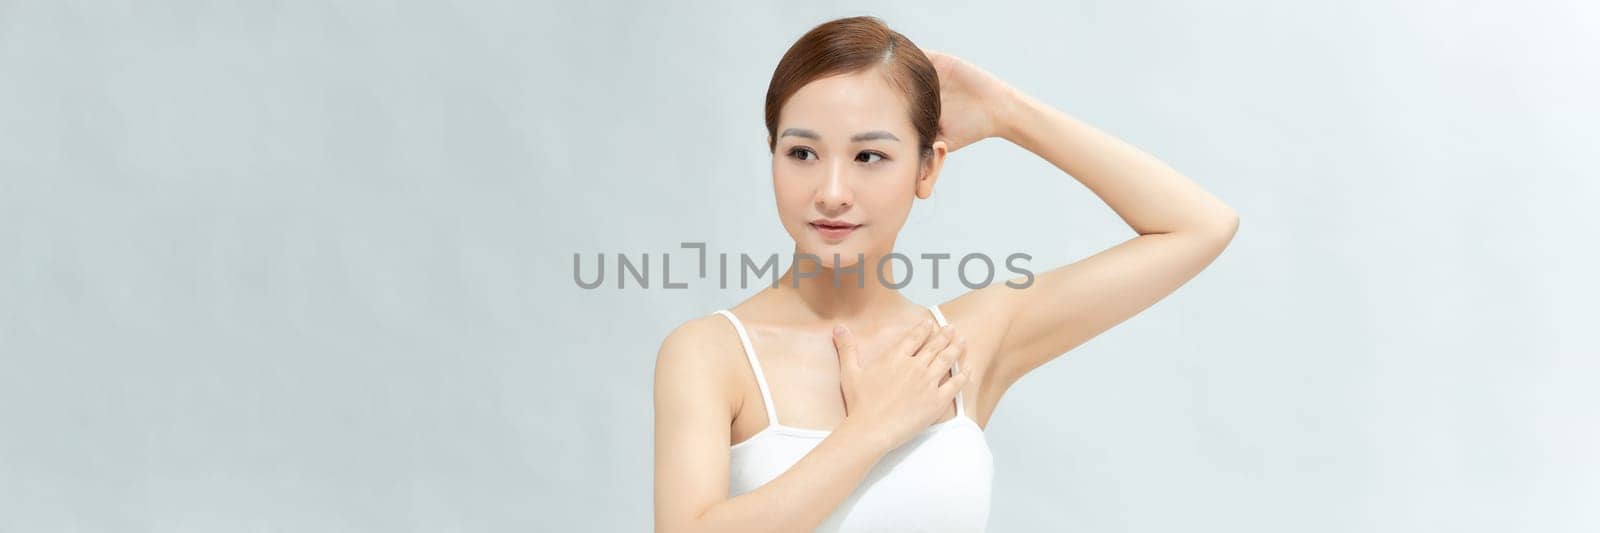 Armpit epilation, lacer hair removal. Young woman showing clean underarms. Banner by makidotvn